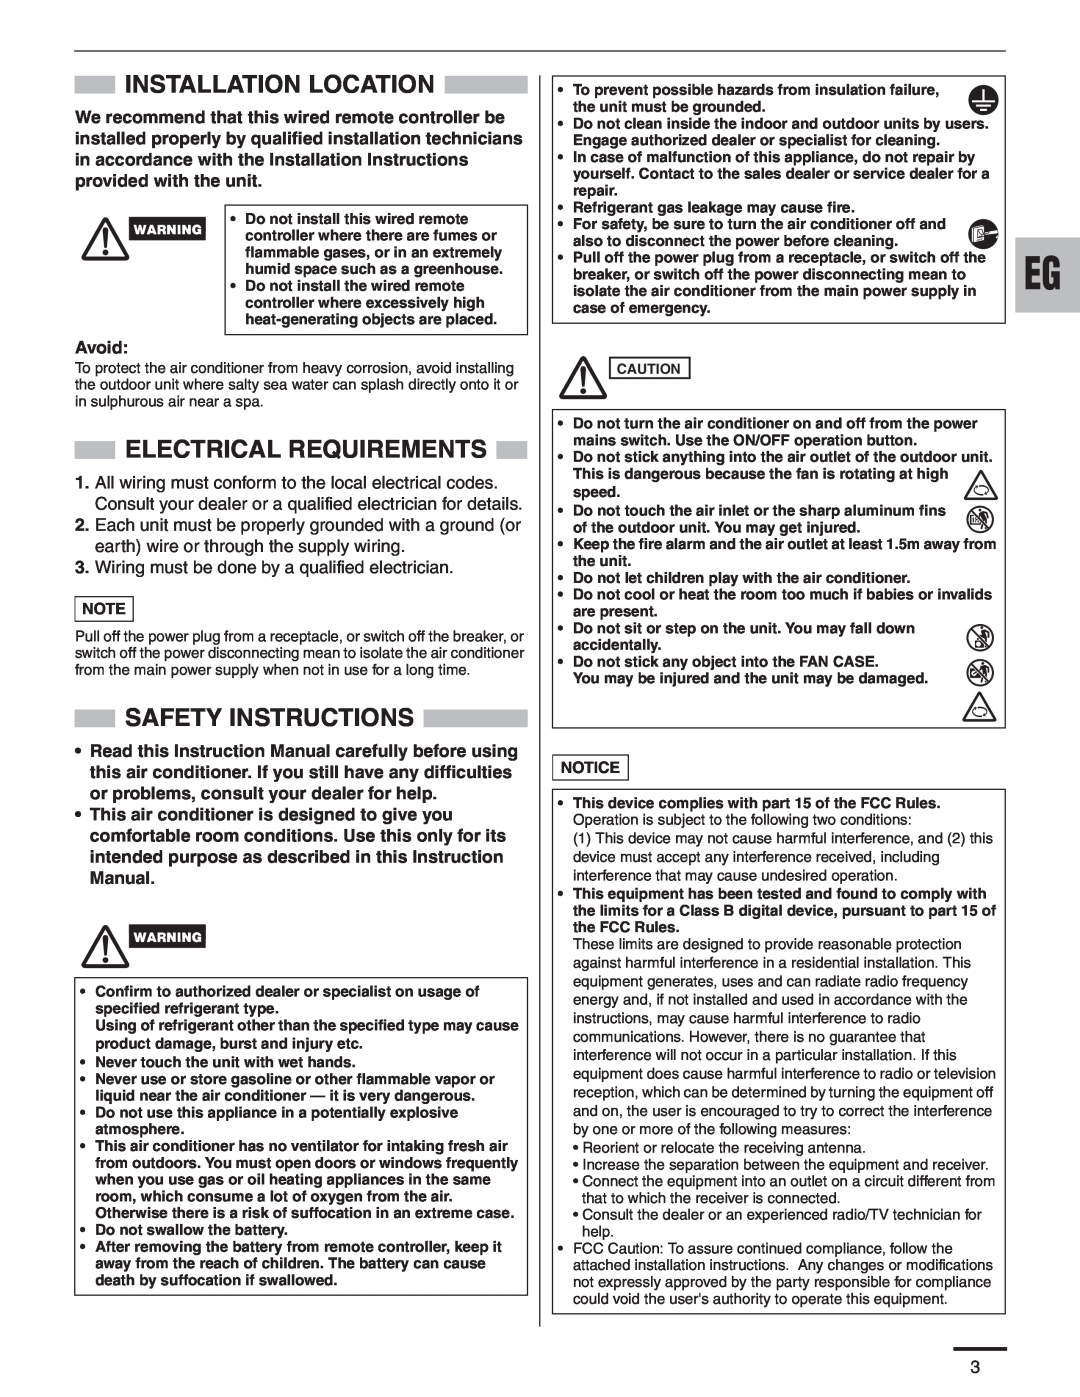 Panasonic CZ-RD515U service manual Installation Location, Electrical Requirements, Safety Instructions, Avoid 